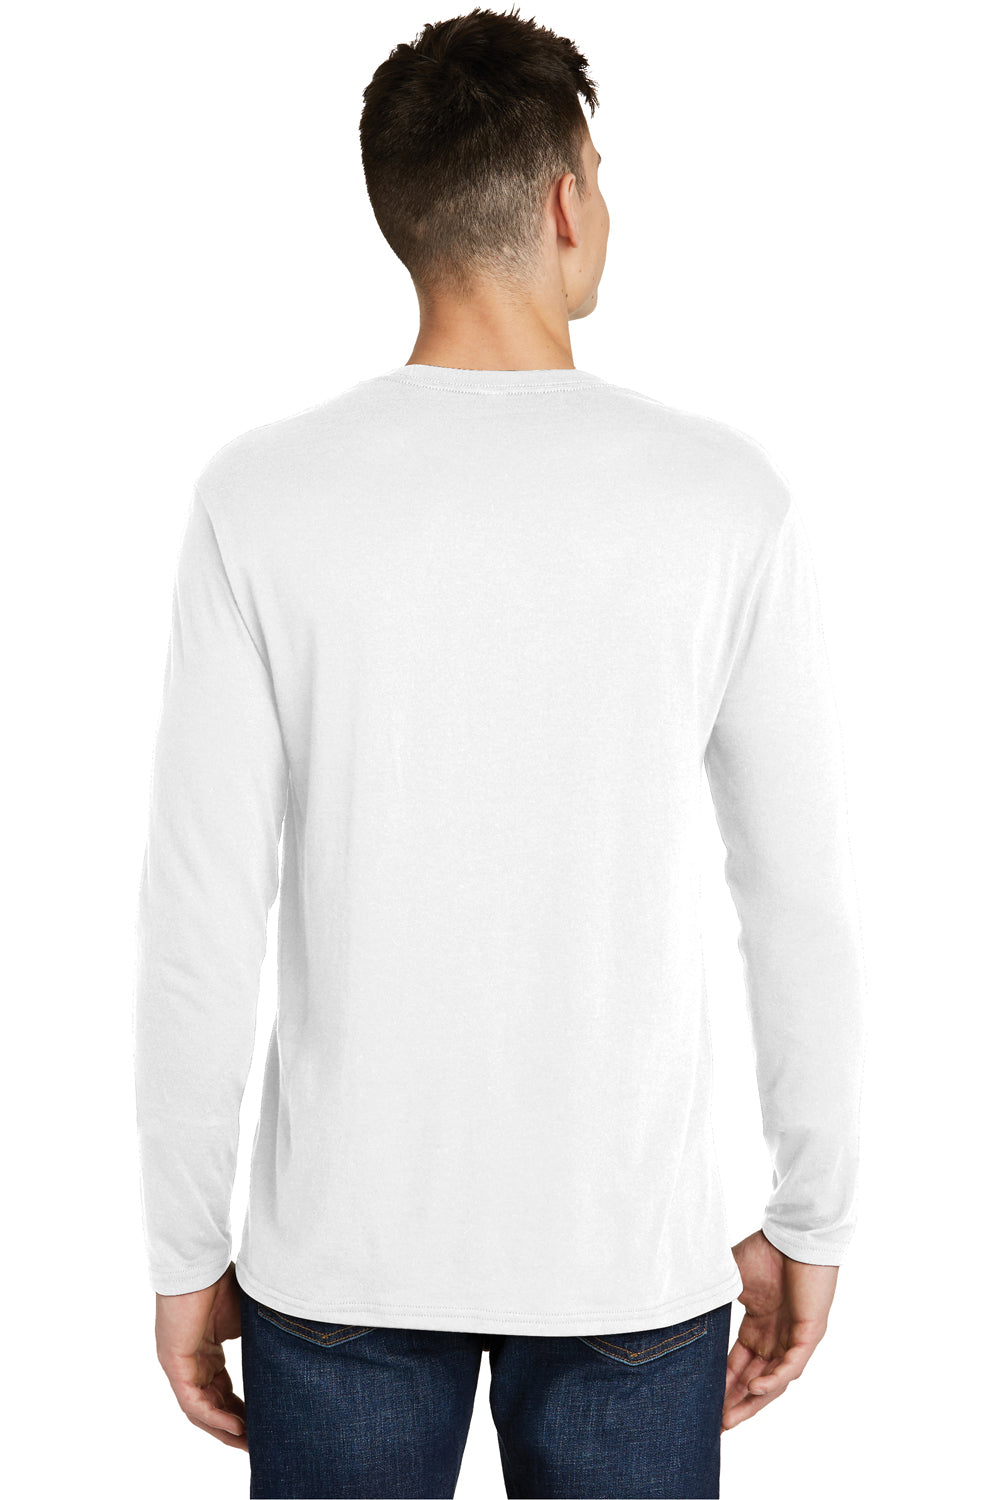 District DT6200 Mens Very Important Long Sleeve Crewneck T-Shirt White Back